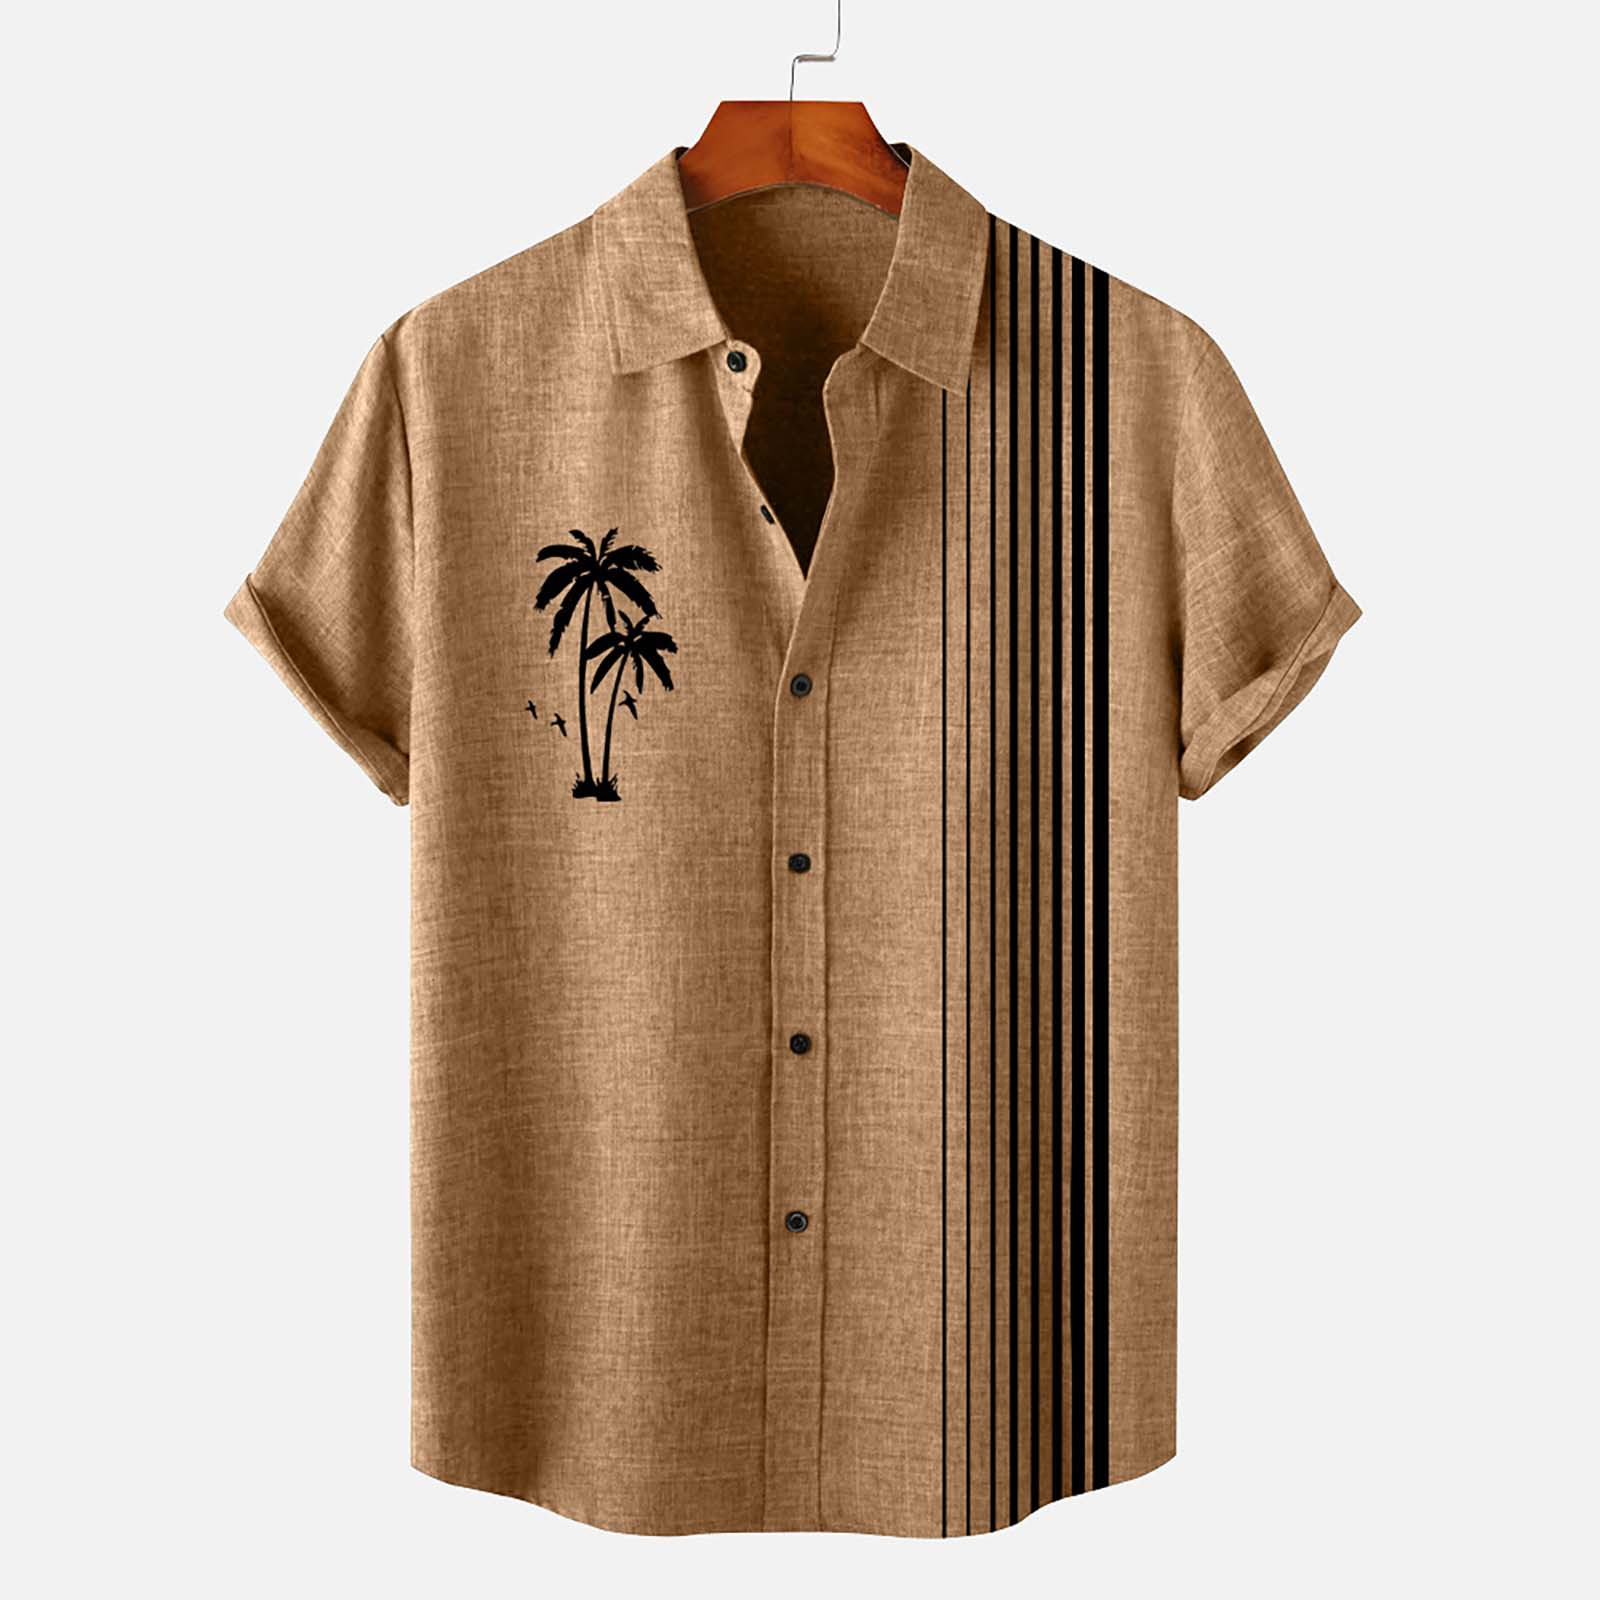 WUWUQF Short Sleeve Shirts for Men Men's Floral Button down Tropical ...